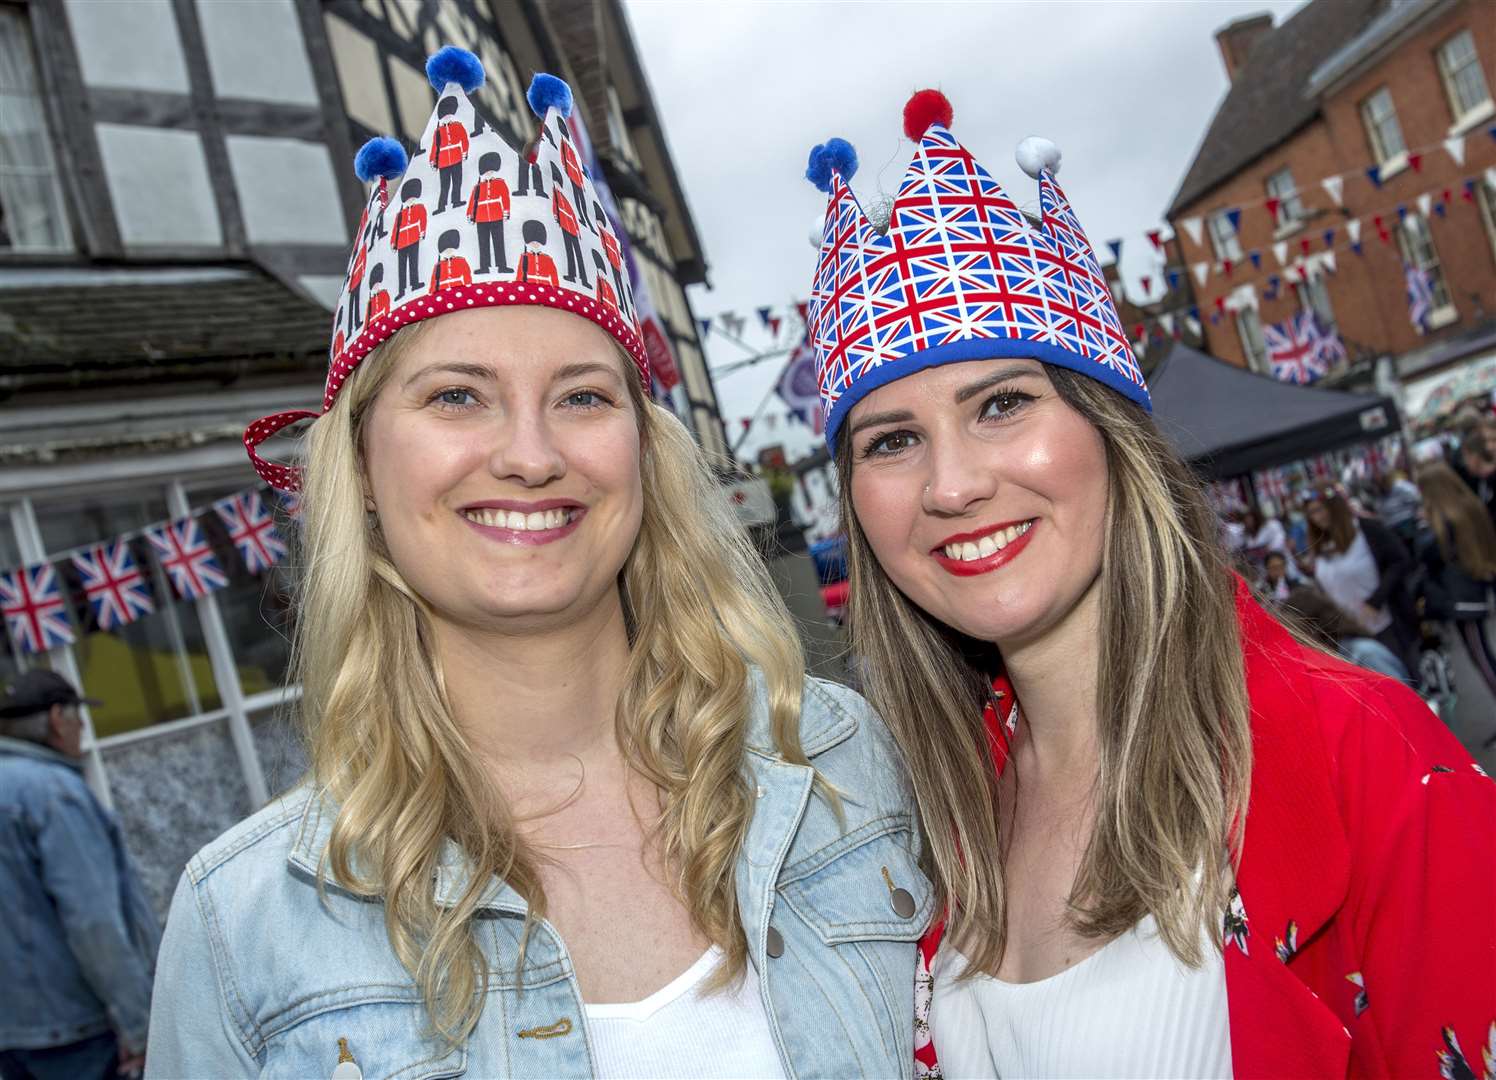 Street parties traditionally celebrate big national events